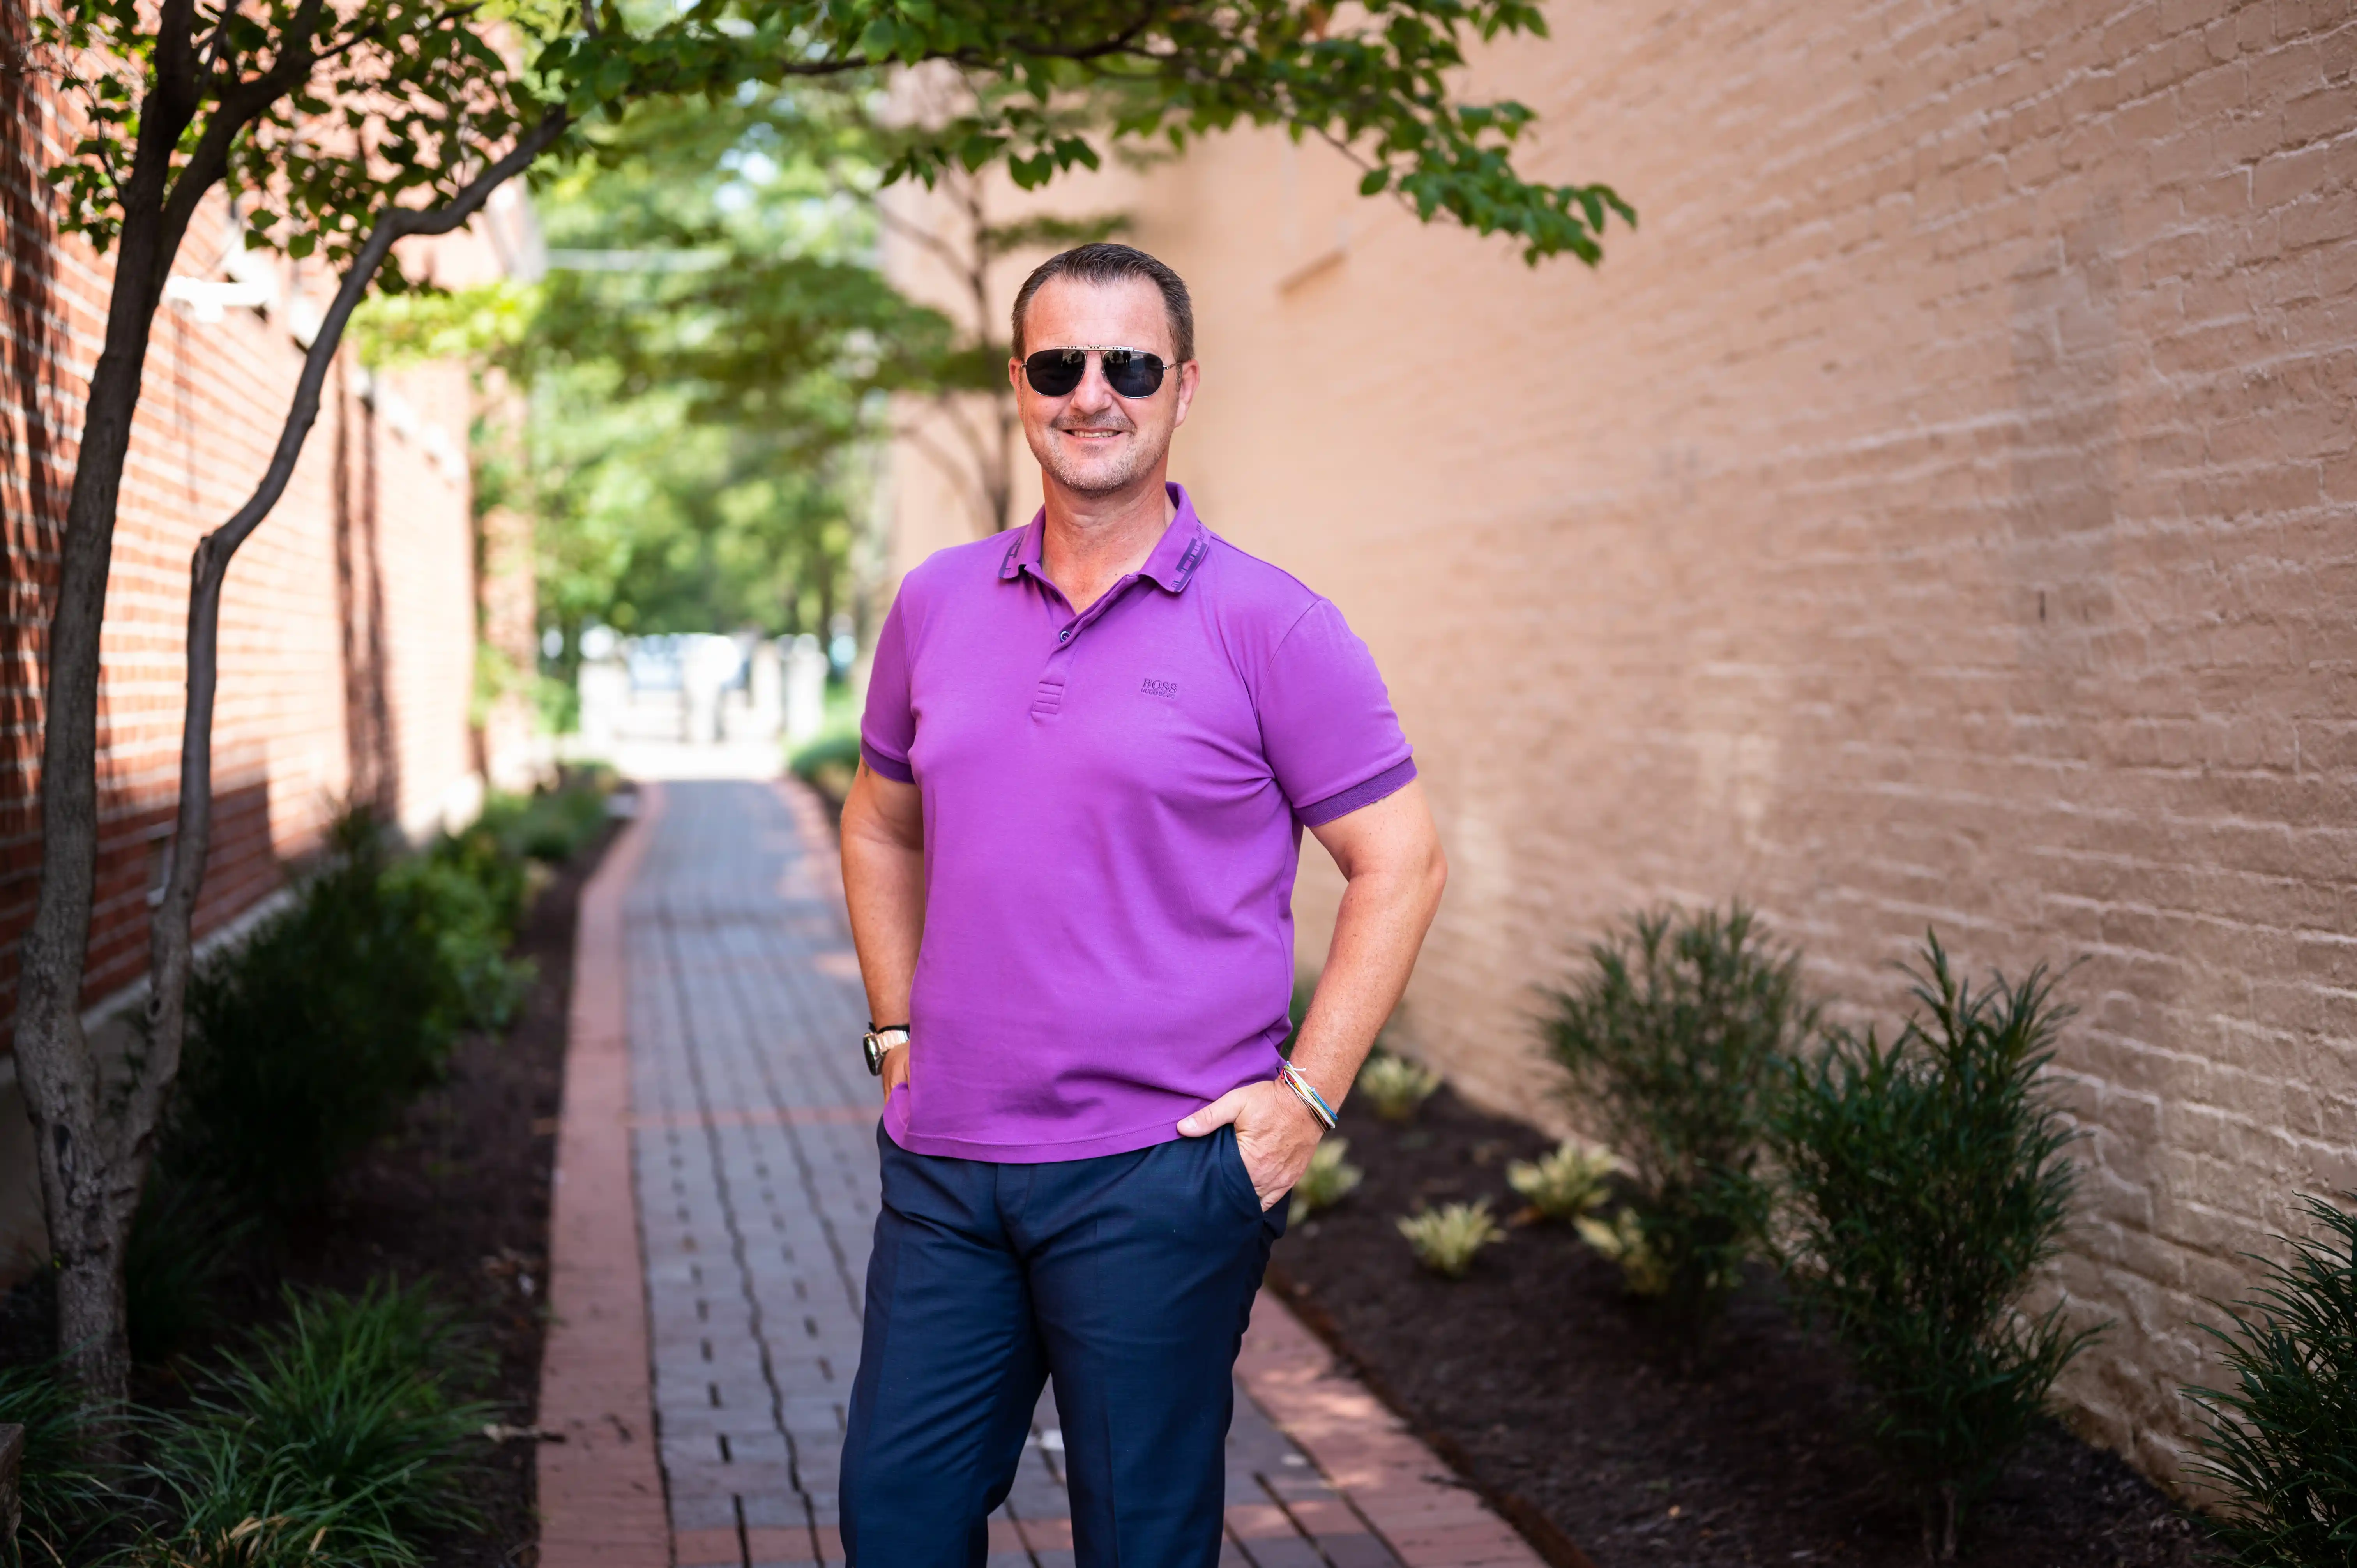 Man standing on a sidewalk with trees, wearing sunglasses and a purple polo shirt.